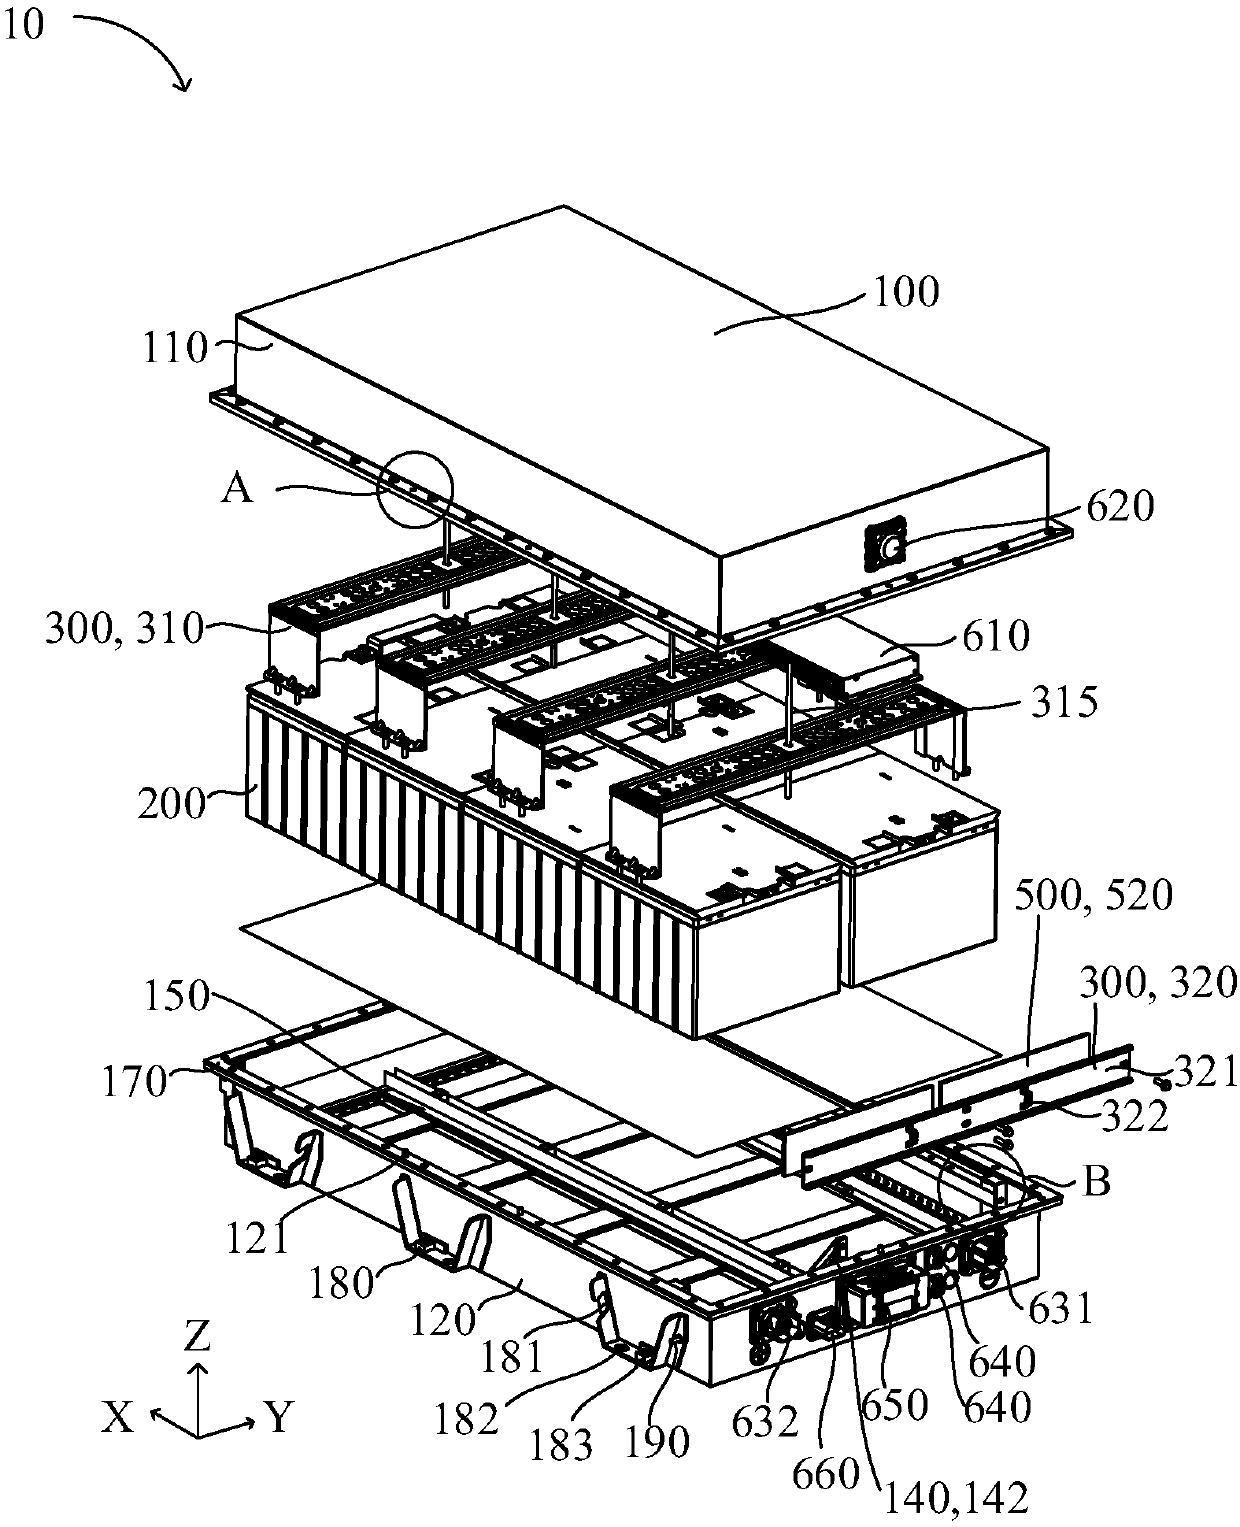 Power battery box having end plate-free battery modules